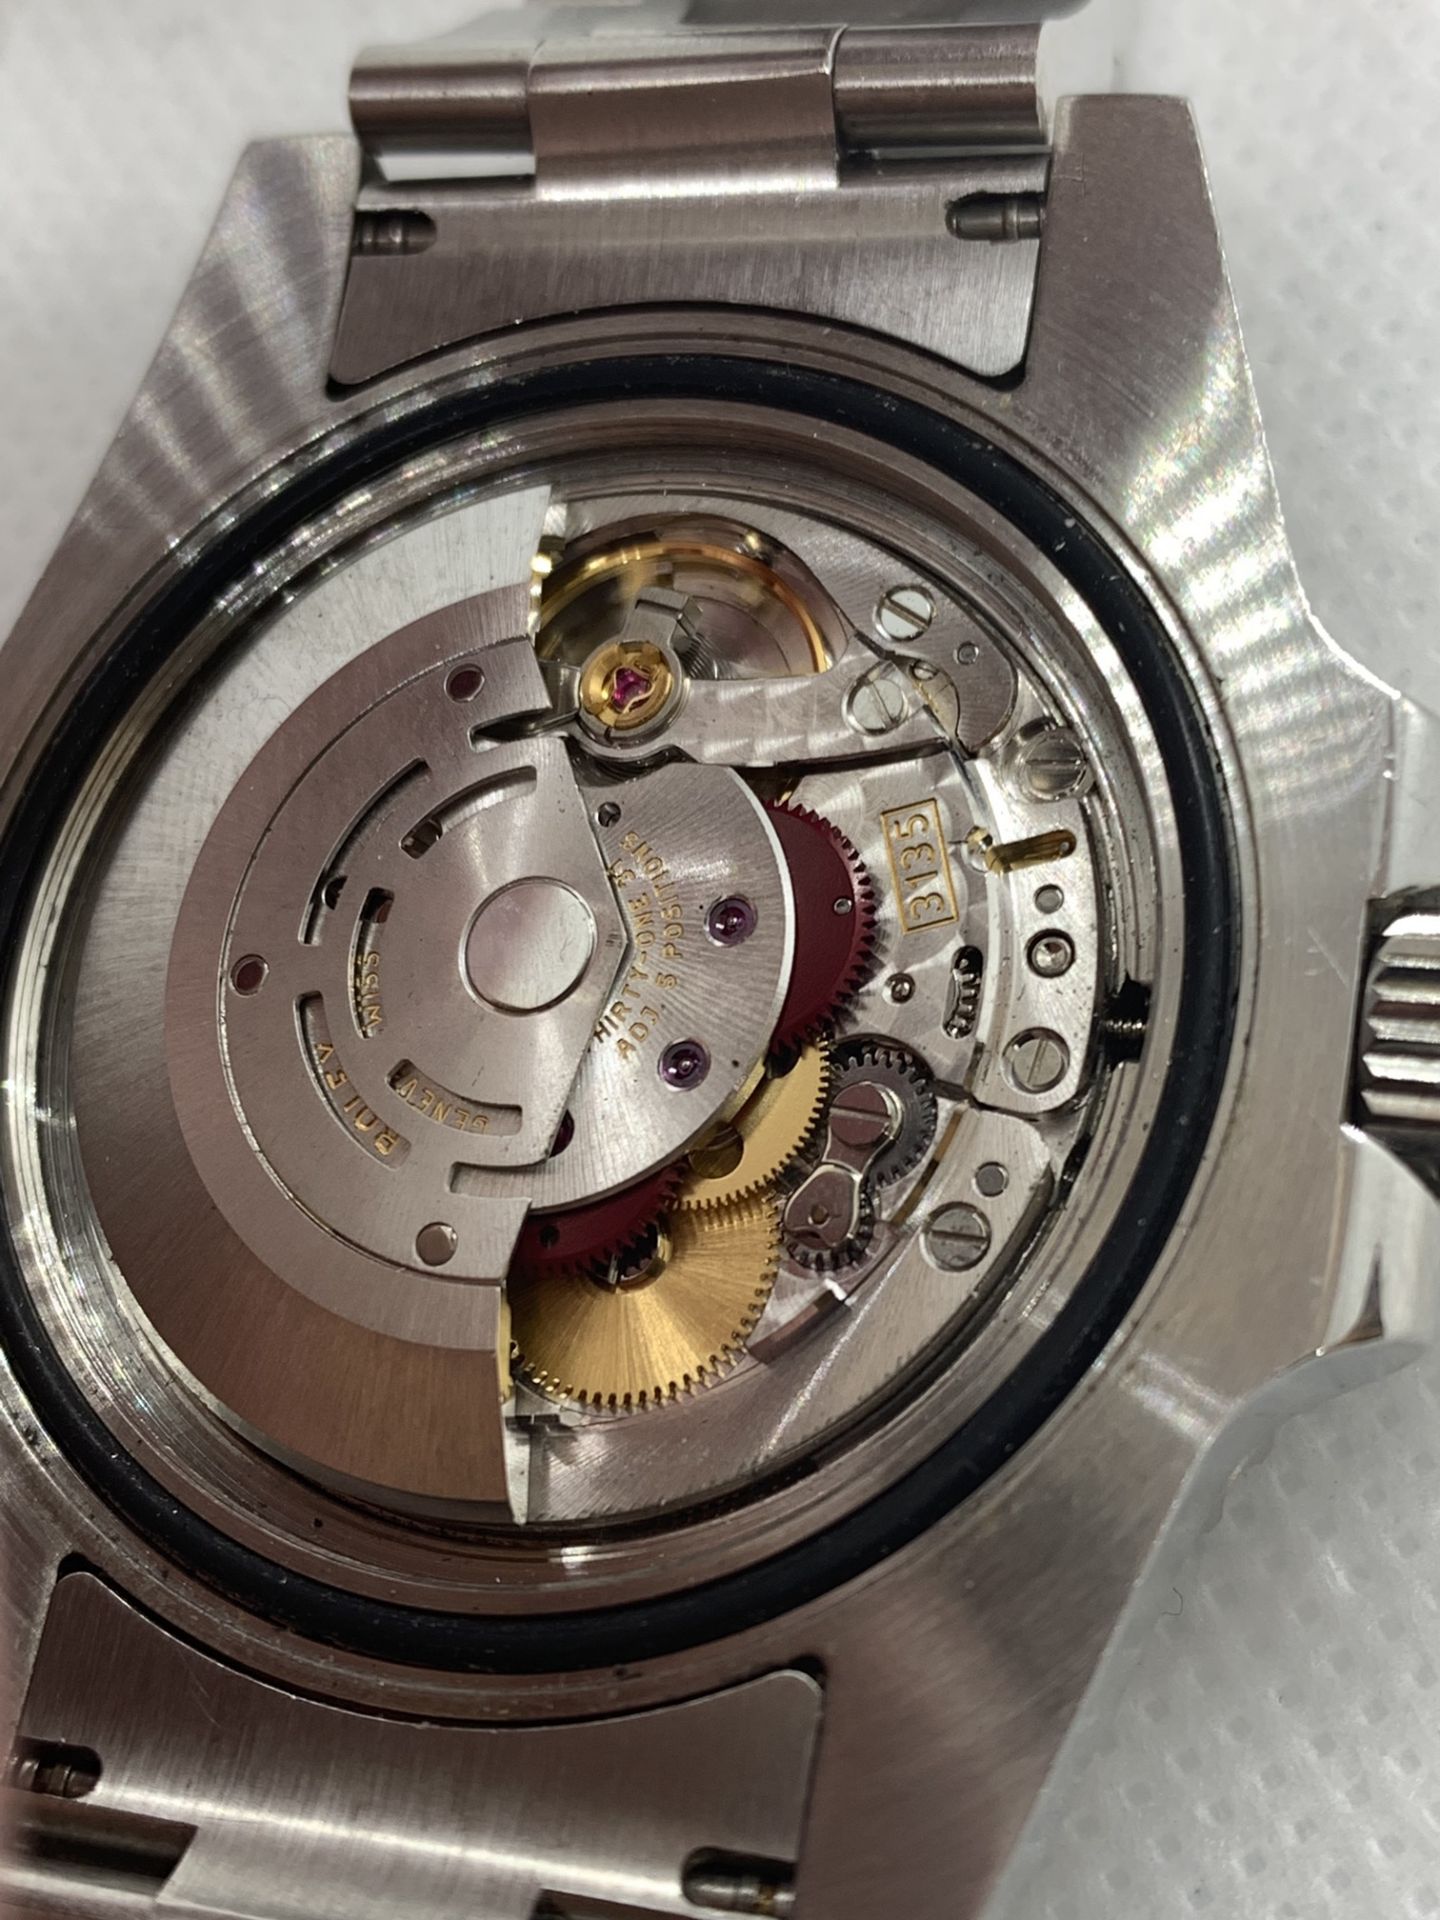 ROLEX SUBMARINER 3135 MOVEMENT WITH S/S METAL WATCH CASE - Image 2 of 13